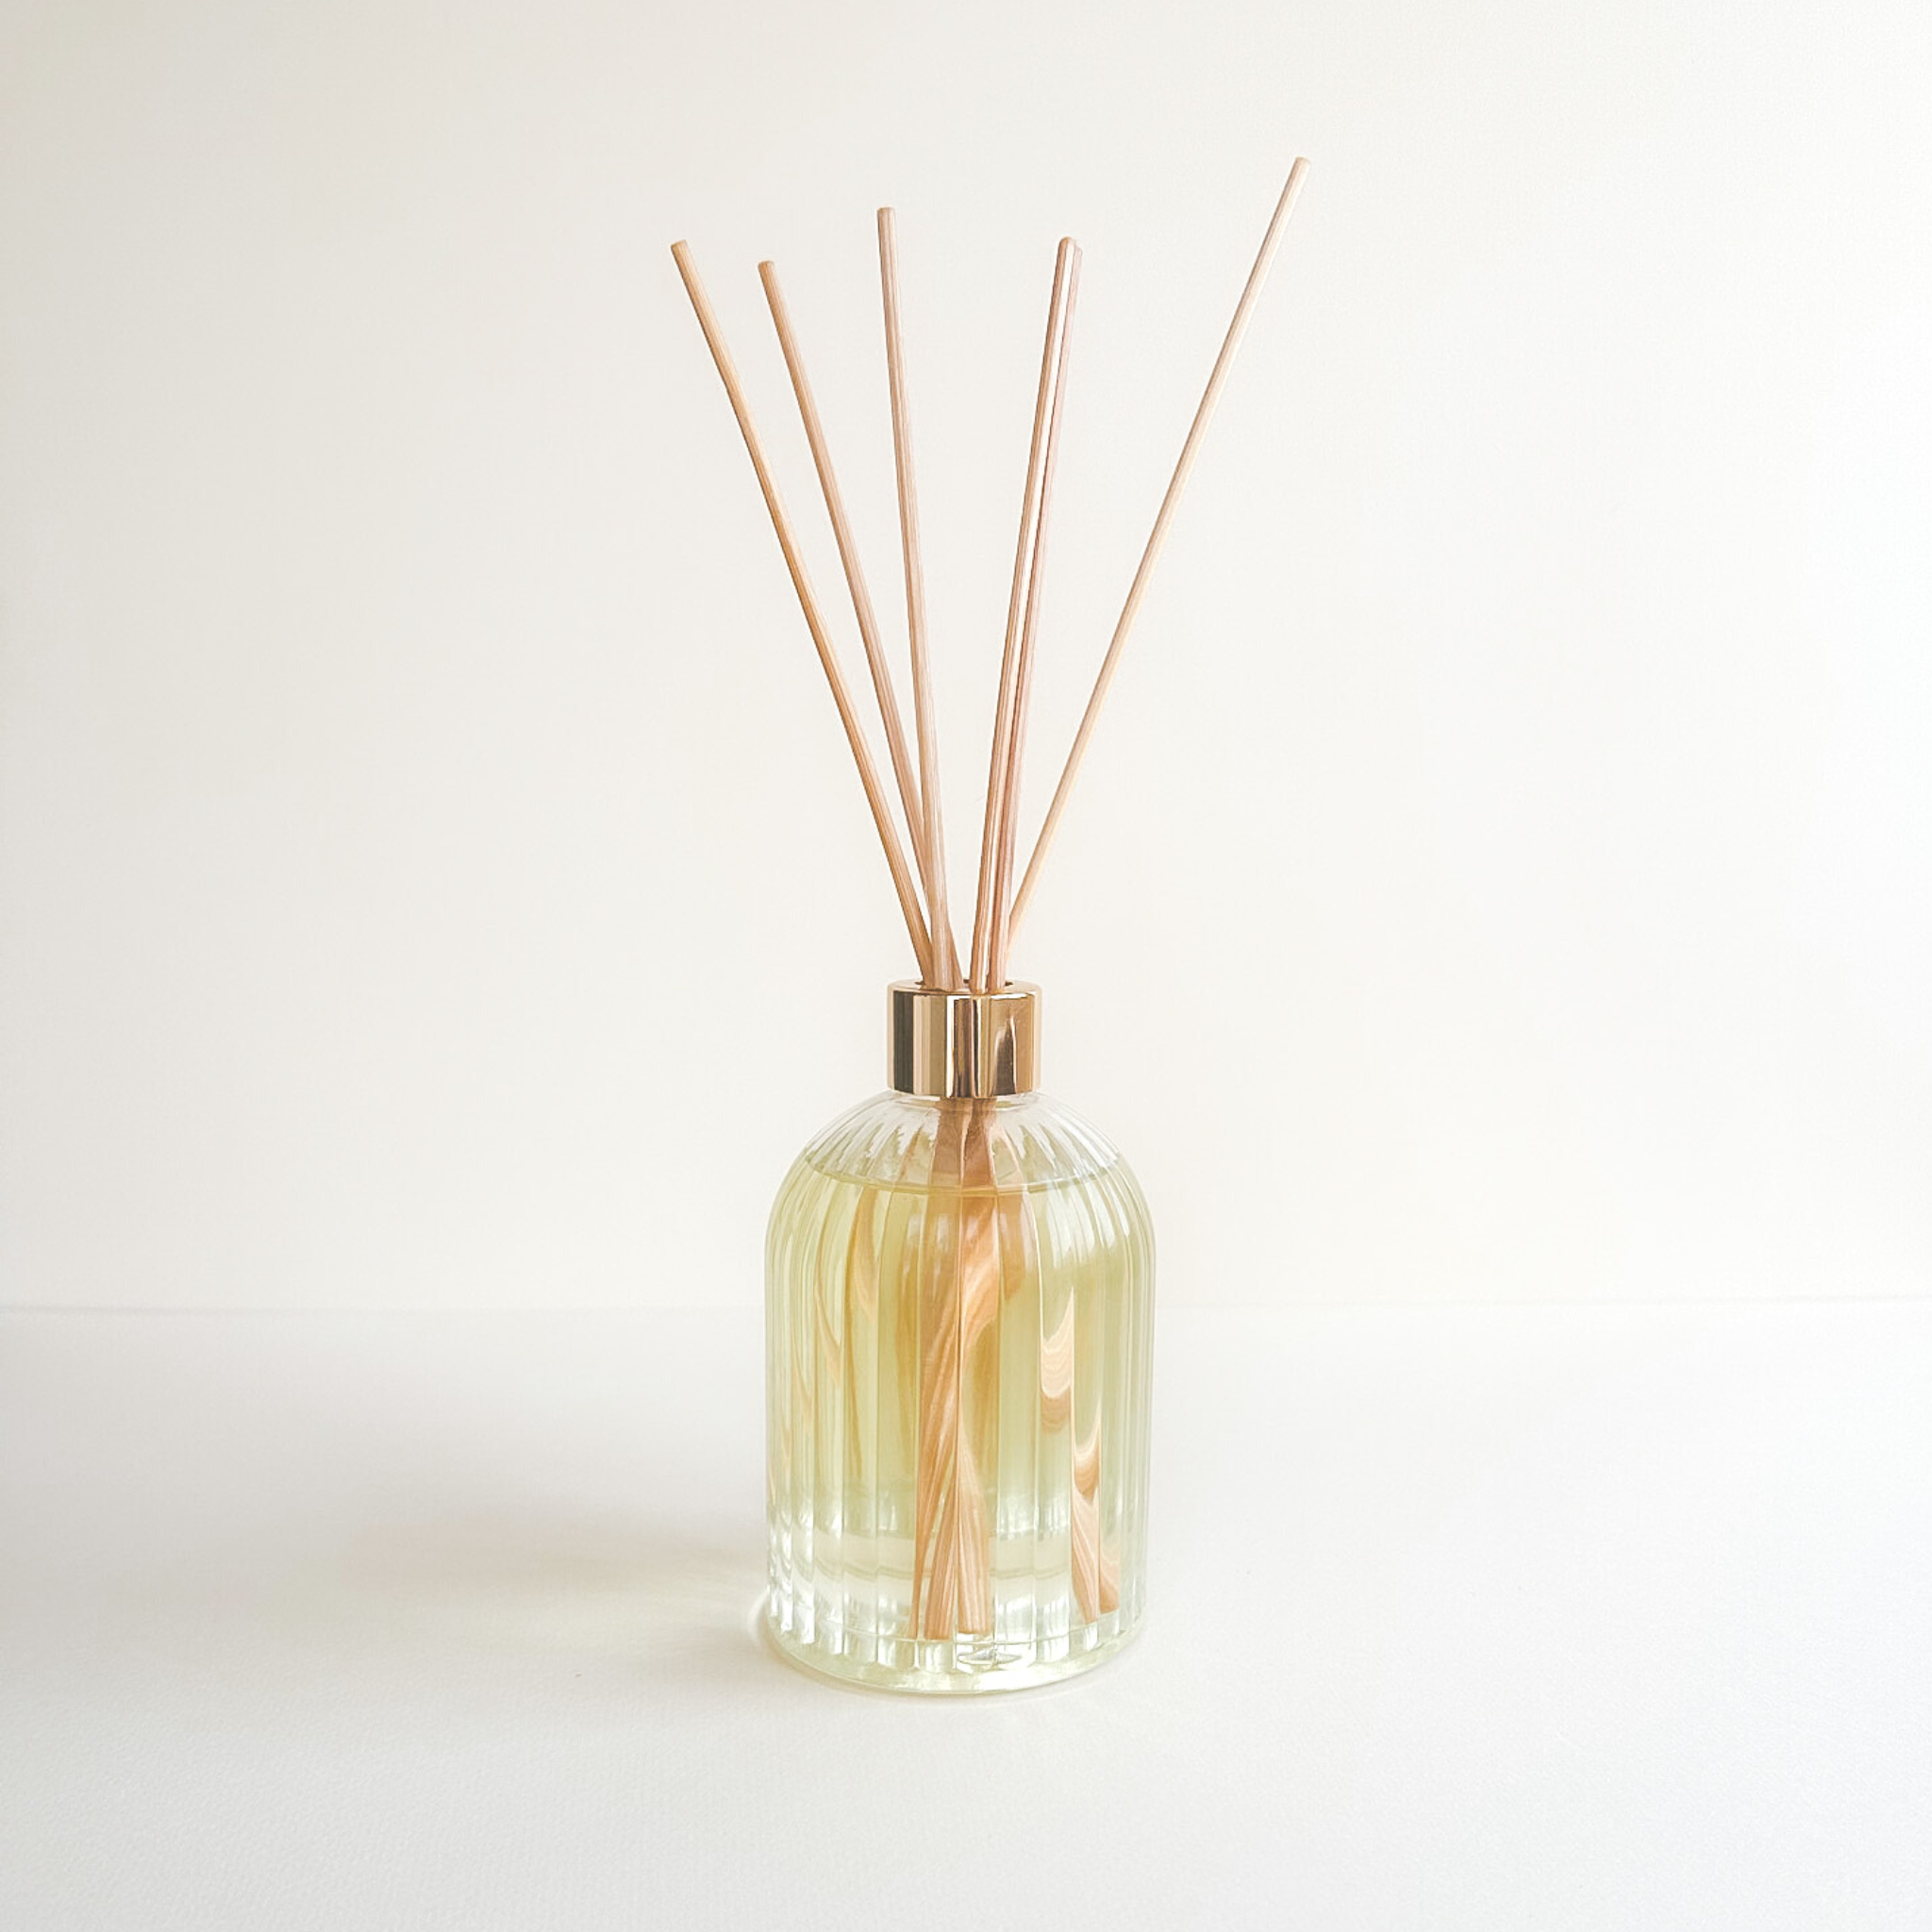 The Misty Mountains Reed Diffuser